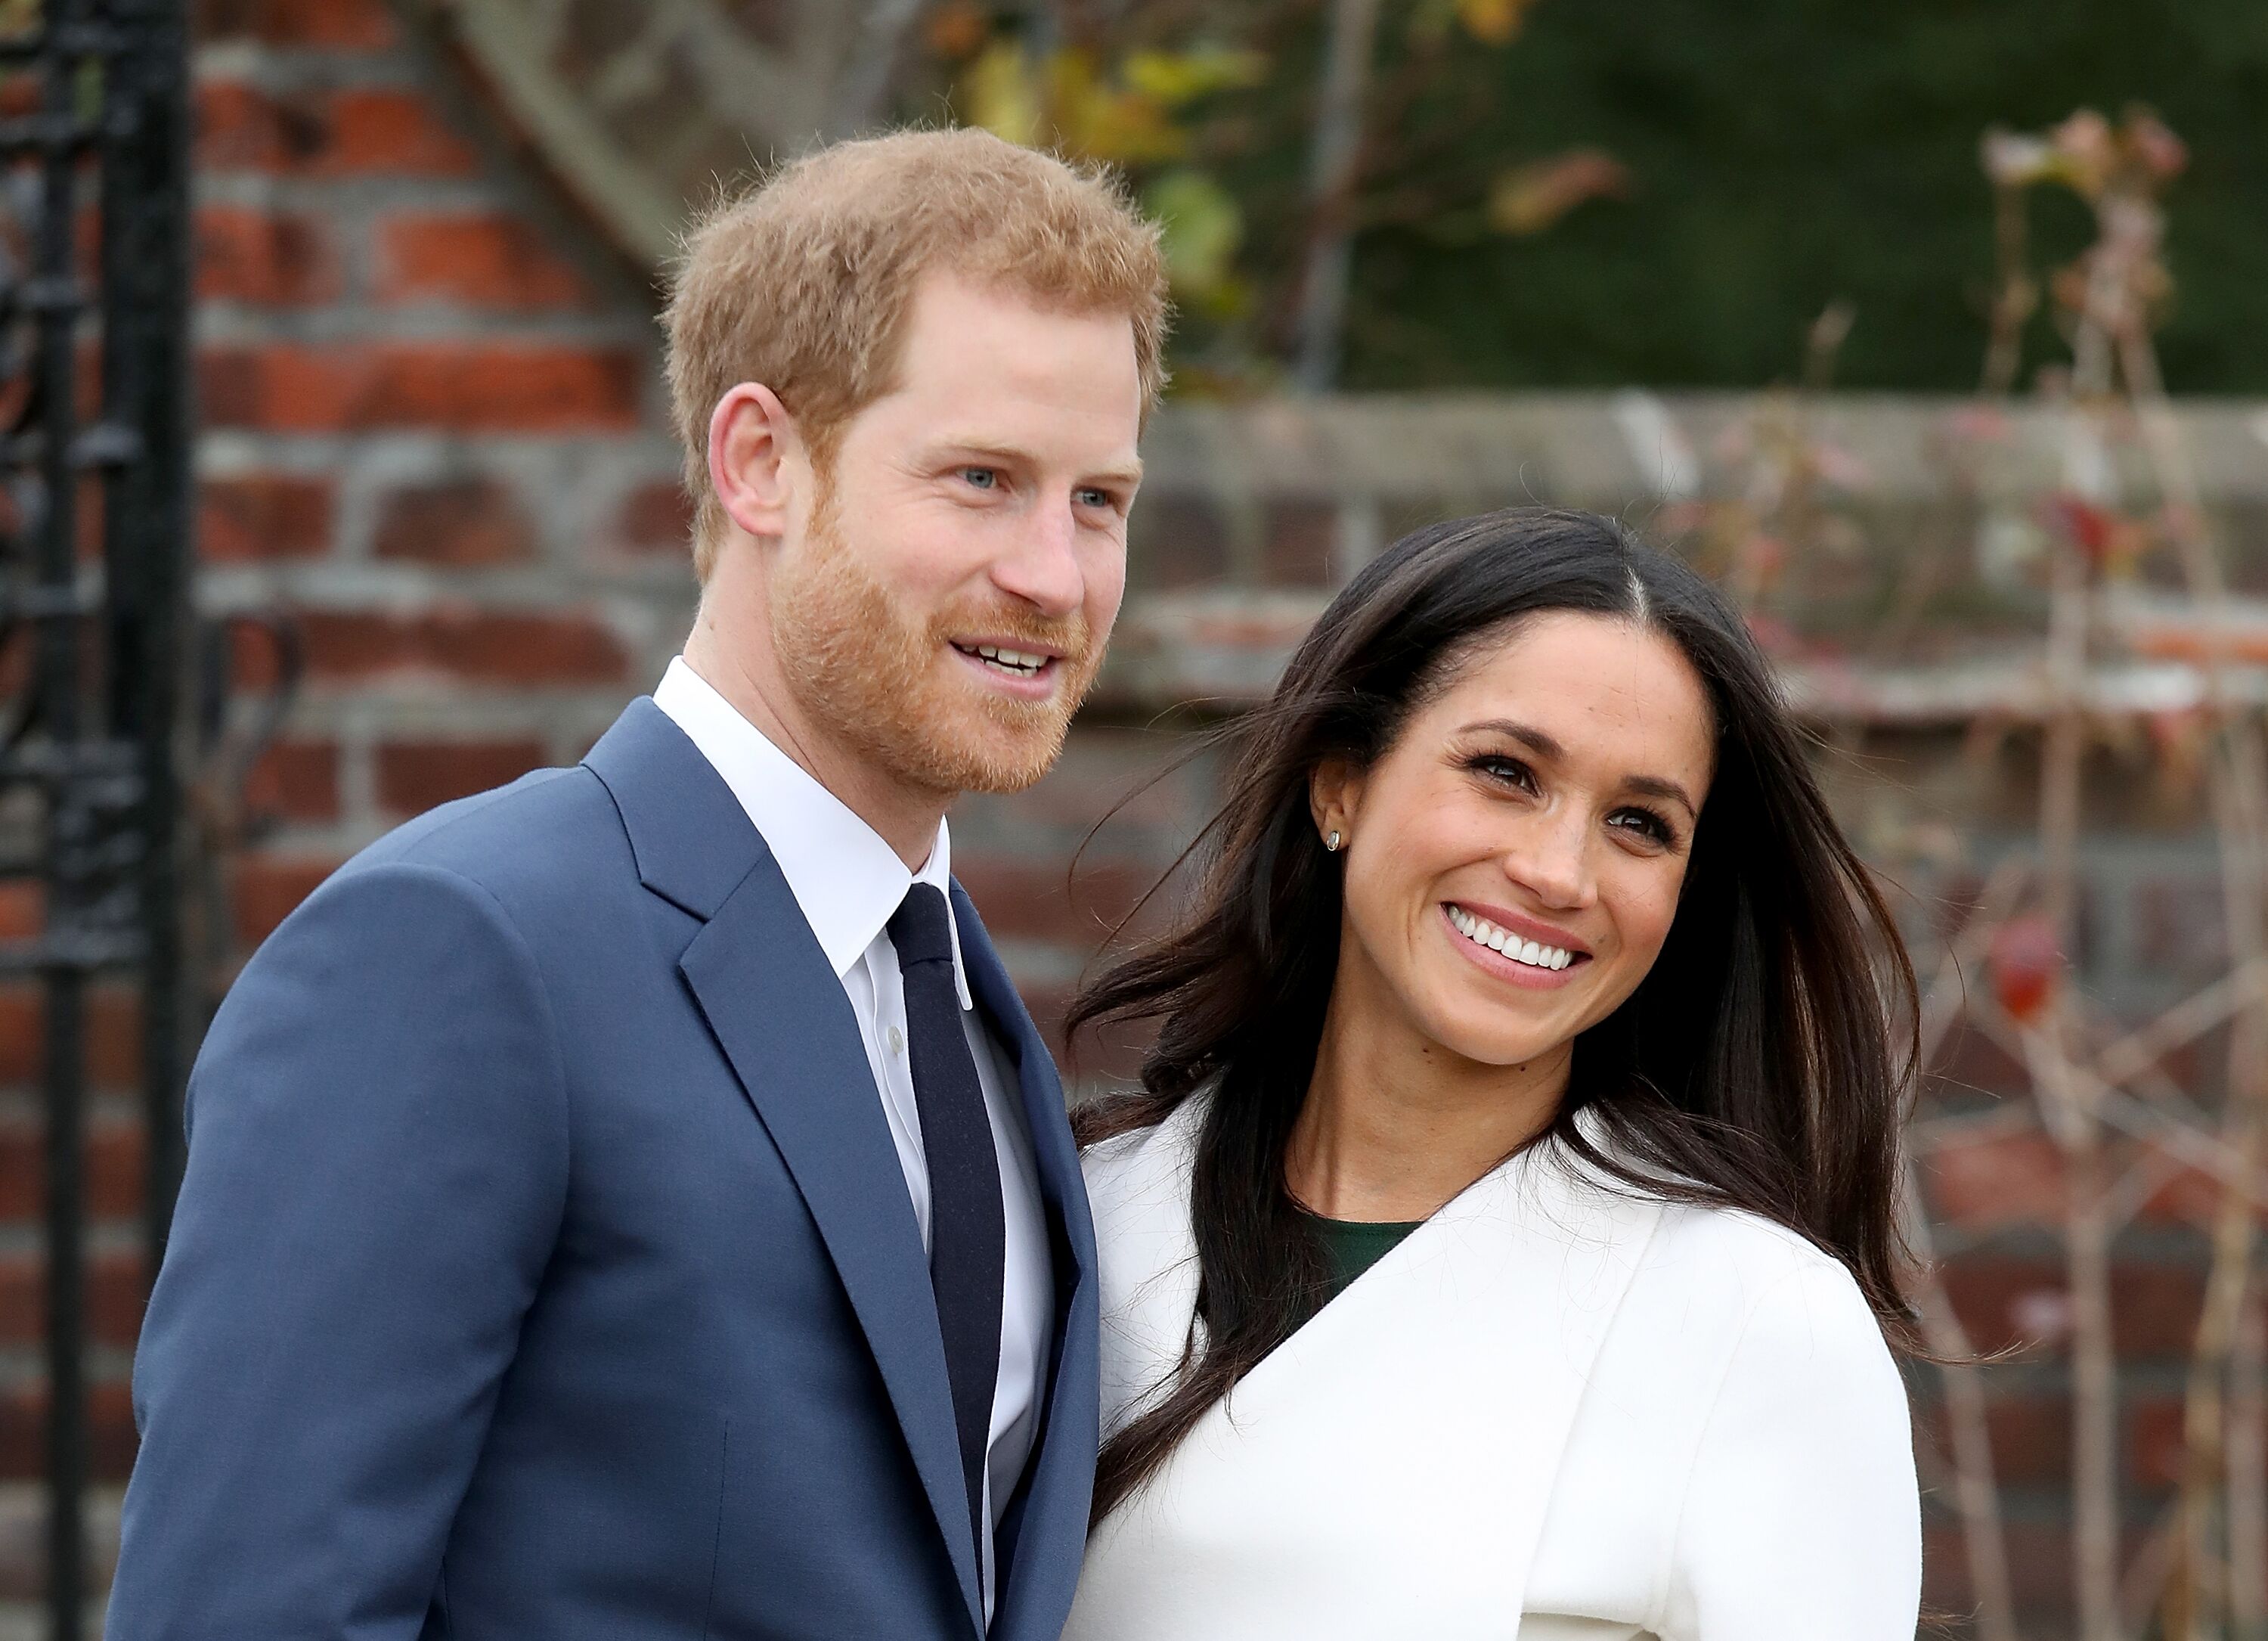 Prince Harry and actress Meghan Markle during an official photocall to announce their engagement at The Sunken Gardens at Kensington Palace on November 27, 2017 in London, England | Photo: Getty Images 